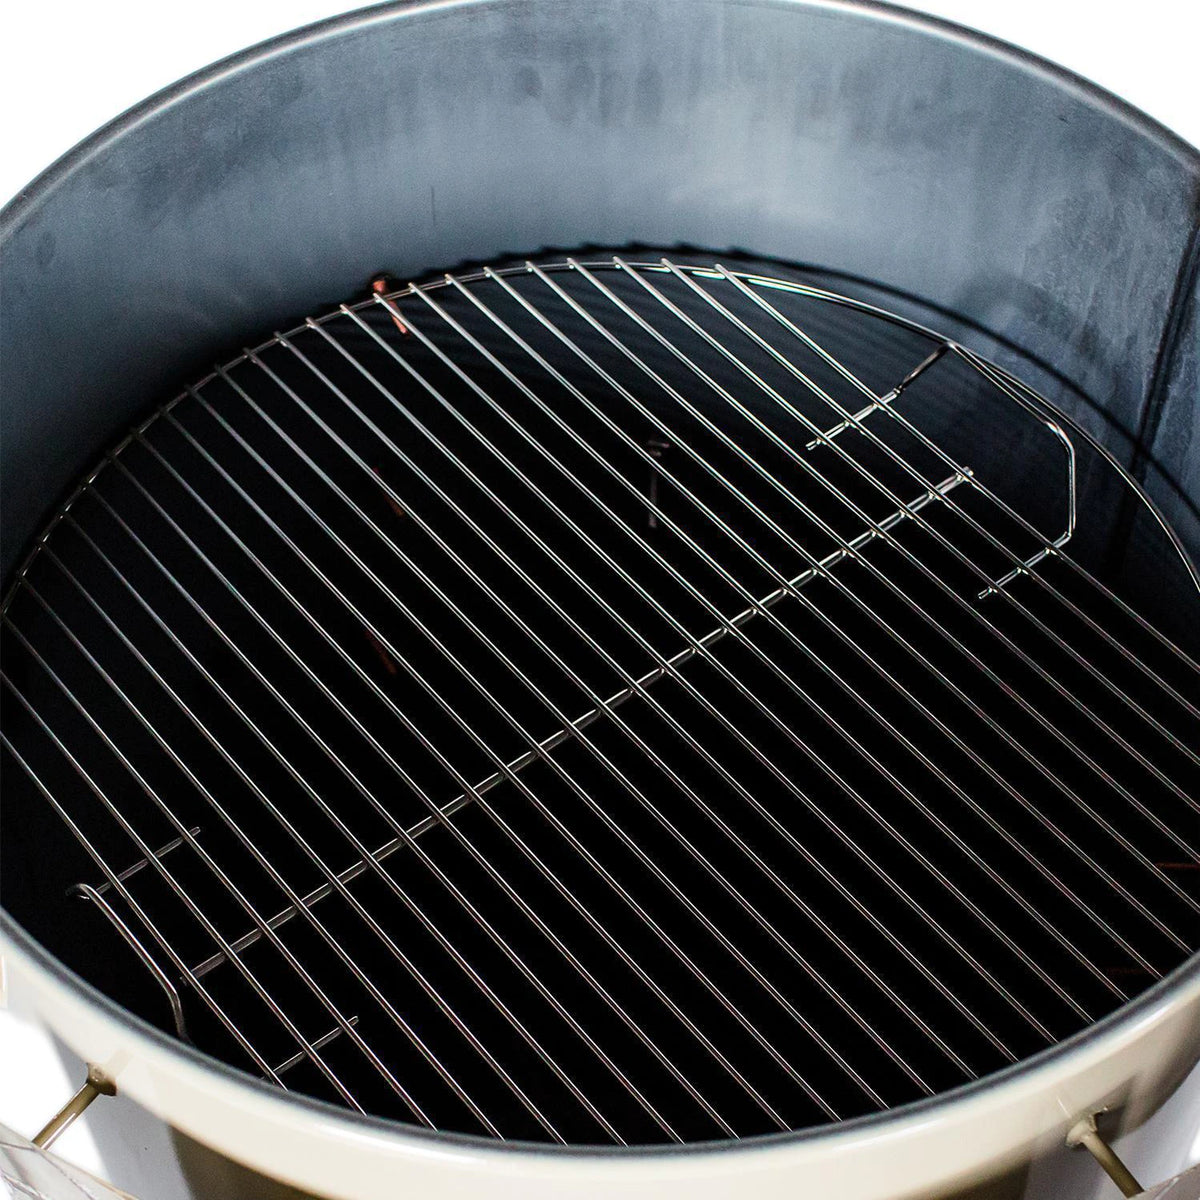 Gateway Drum Smokers 559FB 55 Gallon Charcoal BBQ Smoker - Interior View With Cooking Grate